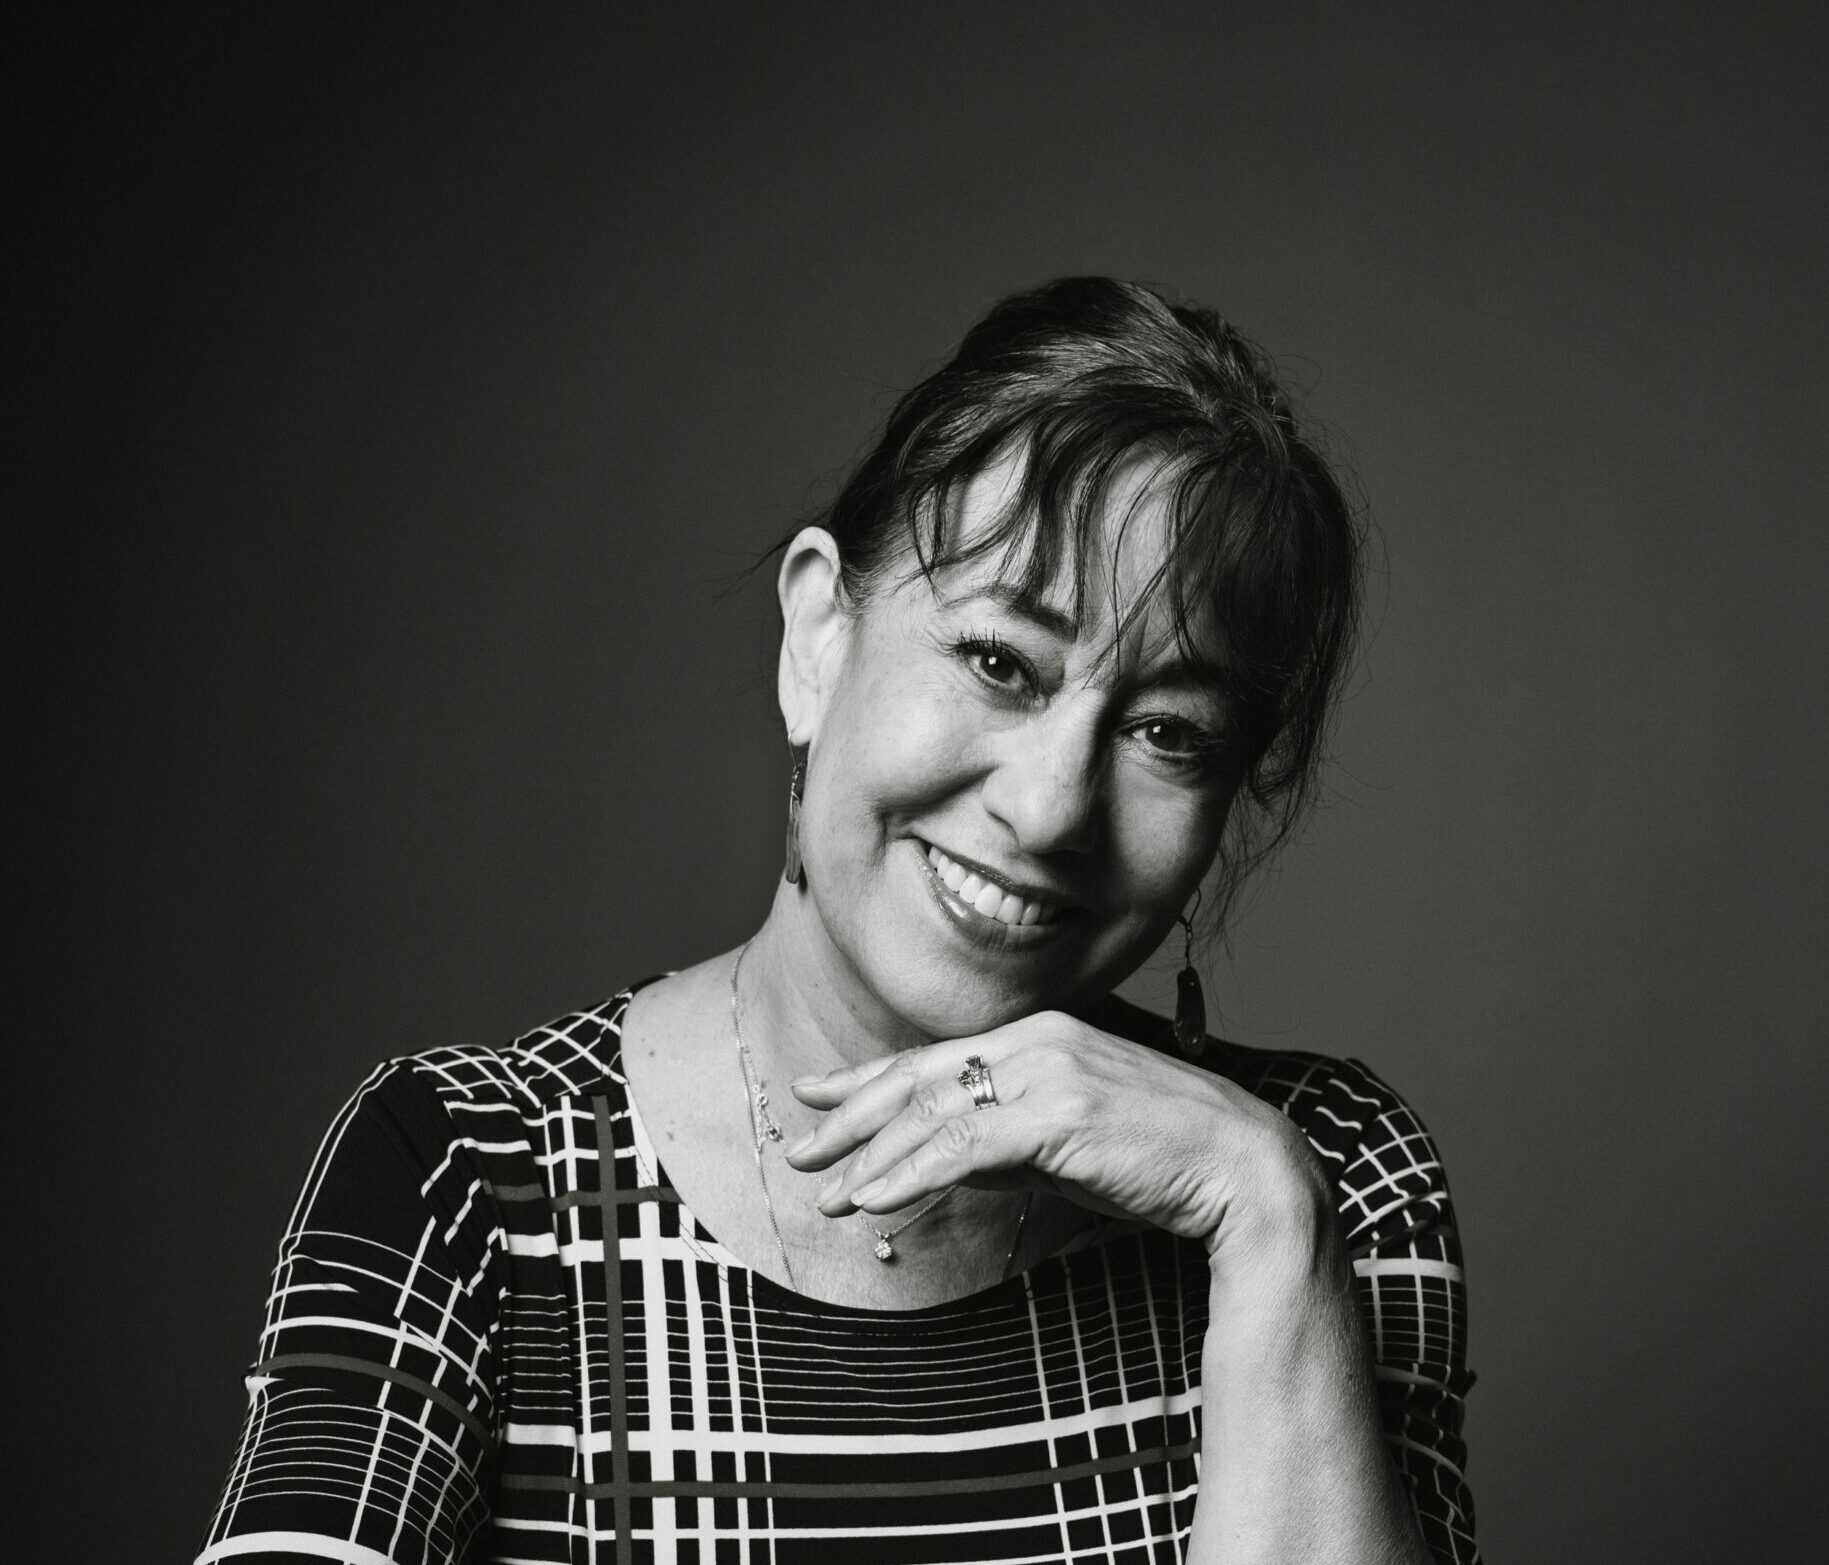 Today, as the director of Ballet West Academy, Evelyn Cisneros-Legate says her illustrious accomplishments are more of a blessing than she “ever dared dream.”